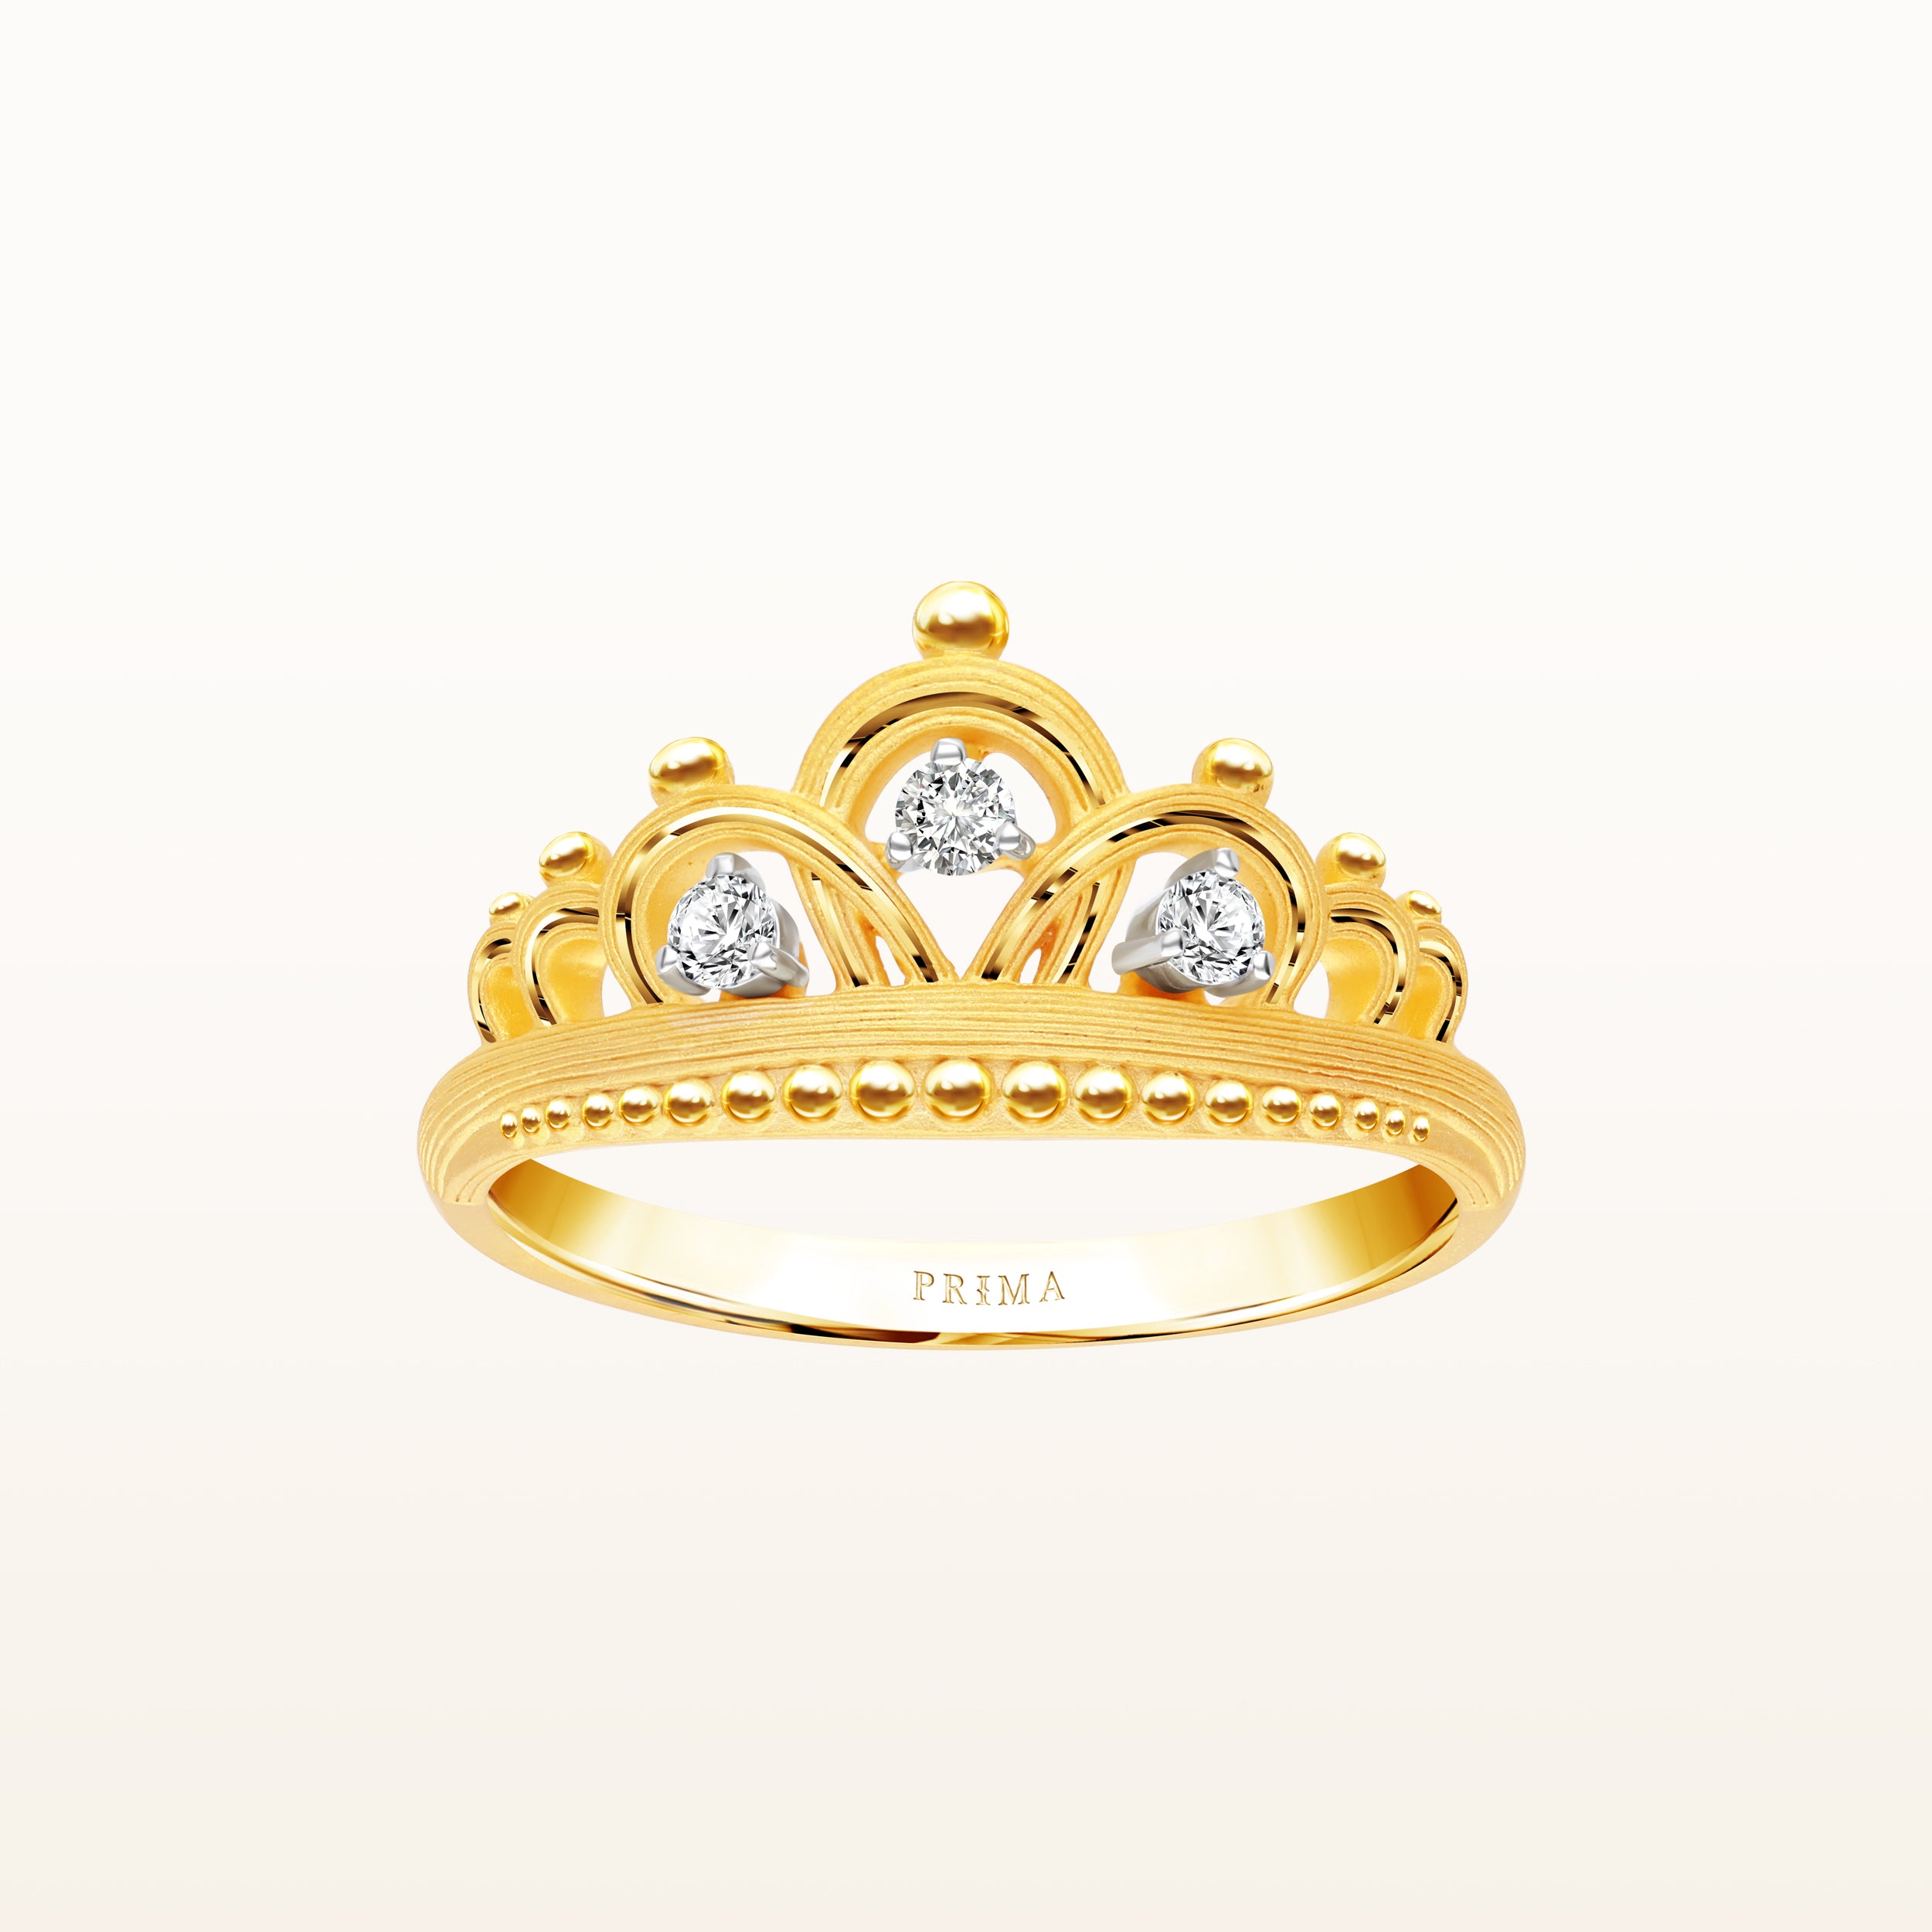 Pure Welsh Gold Engagement Rings - Welsh Gold